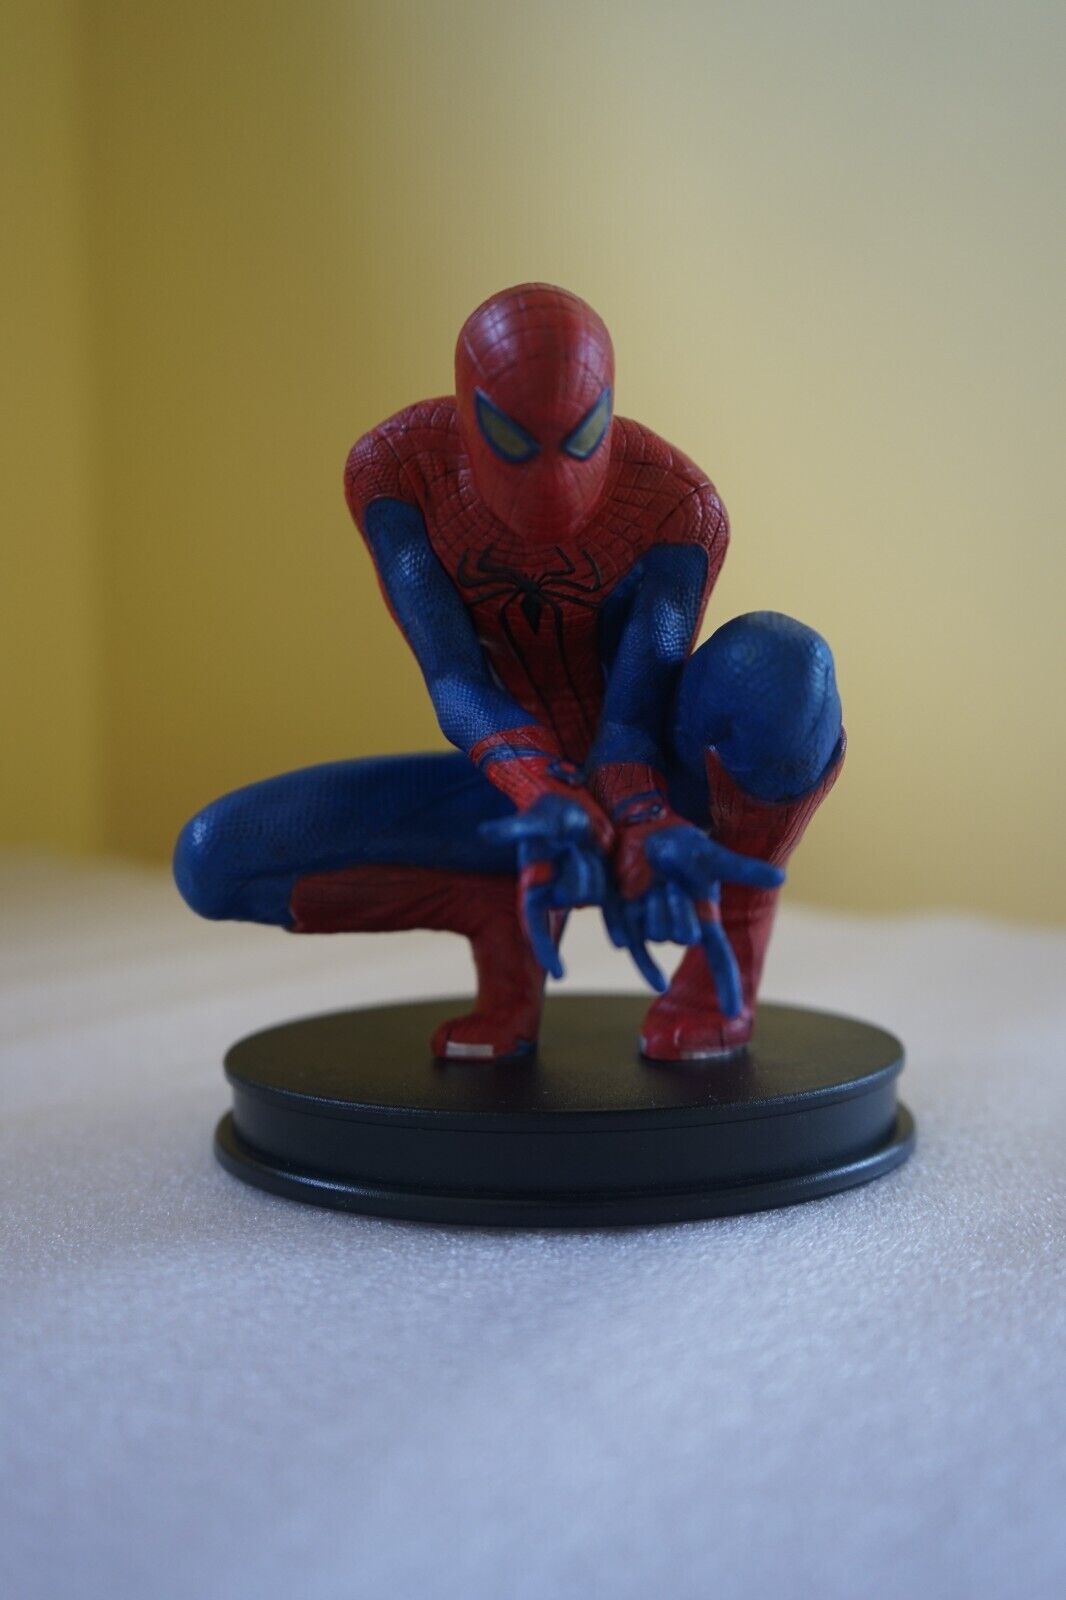 2012 Marvel The Amazing Spider-Man Limited Edition Figurine